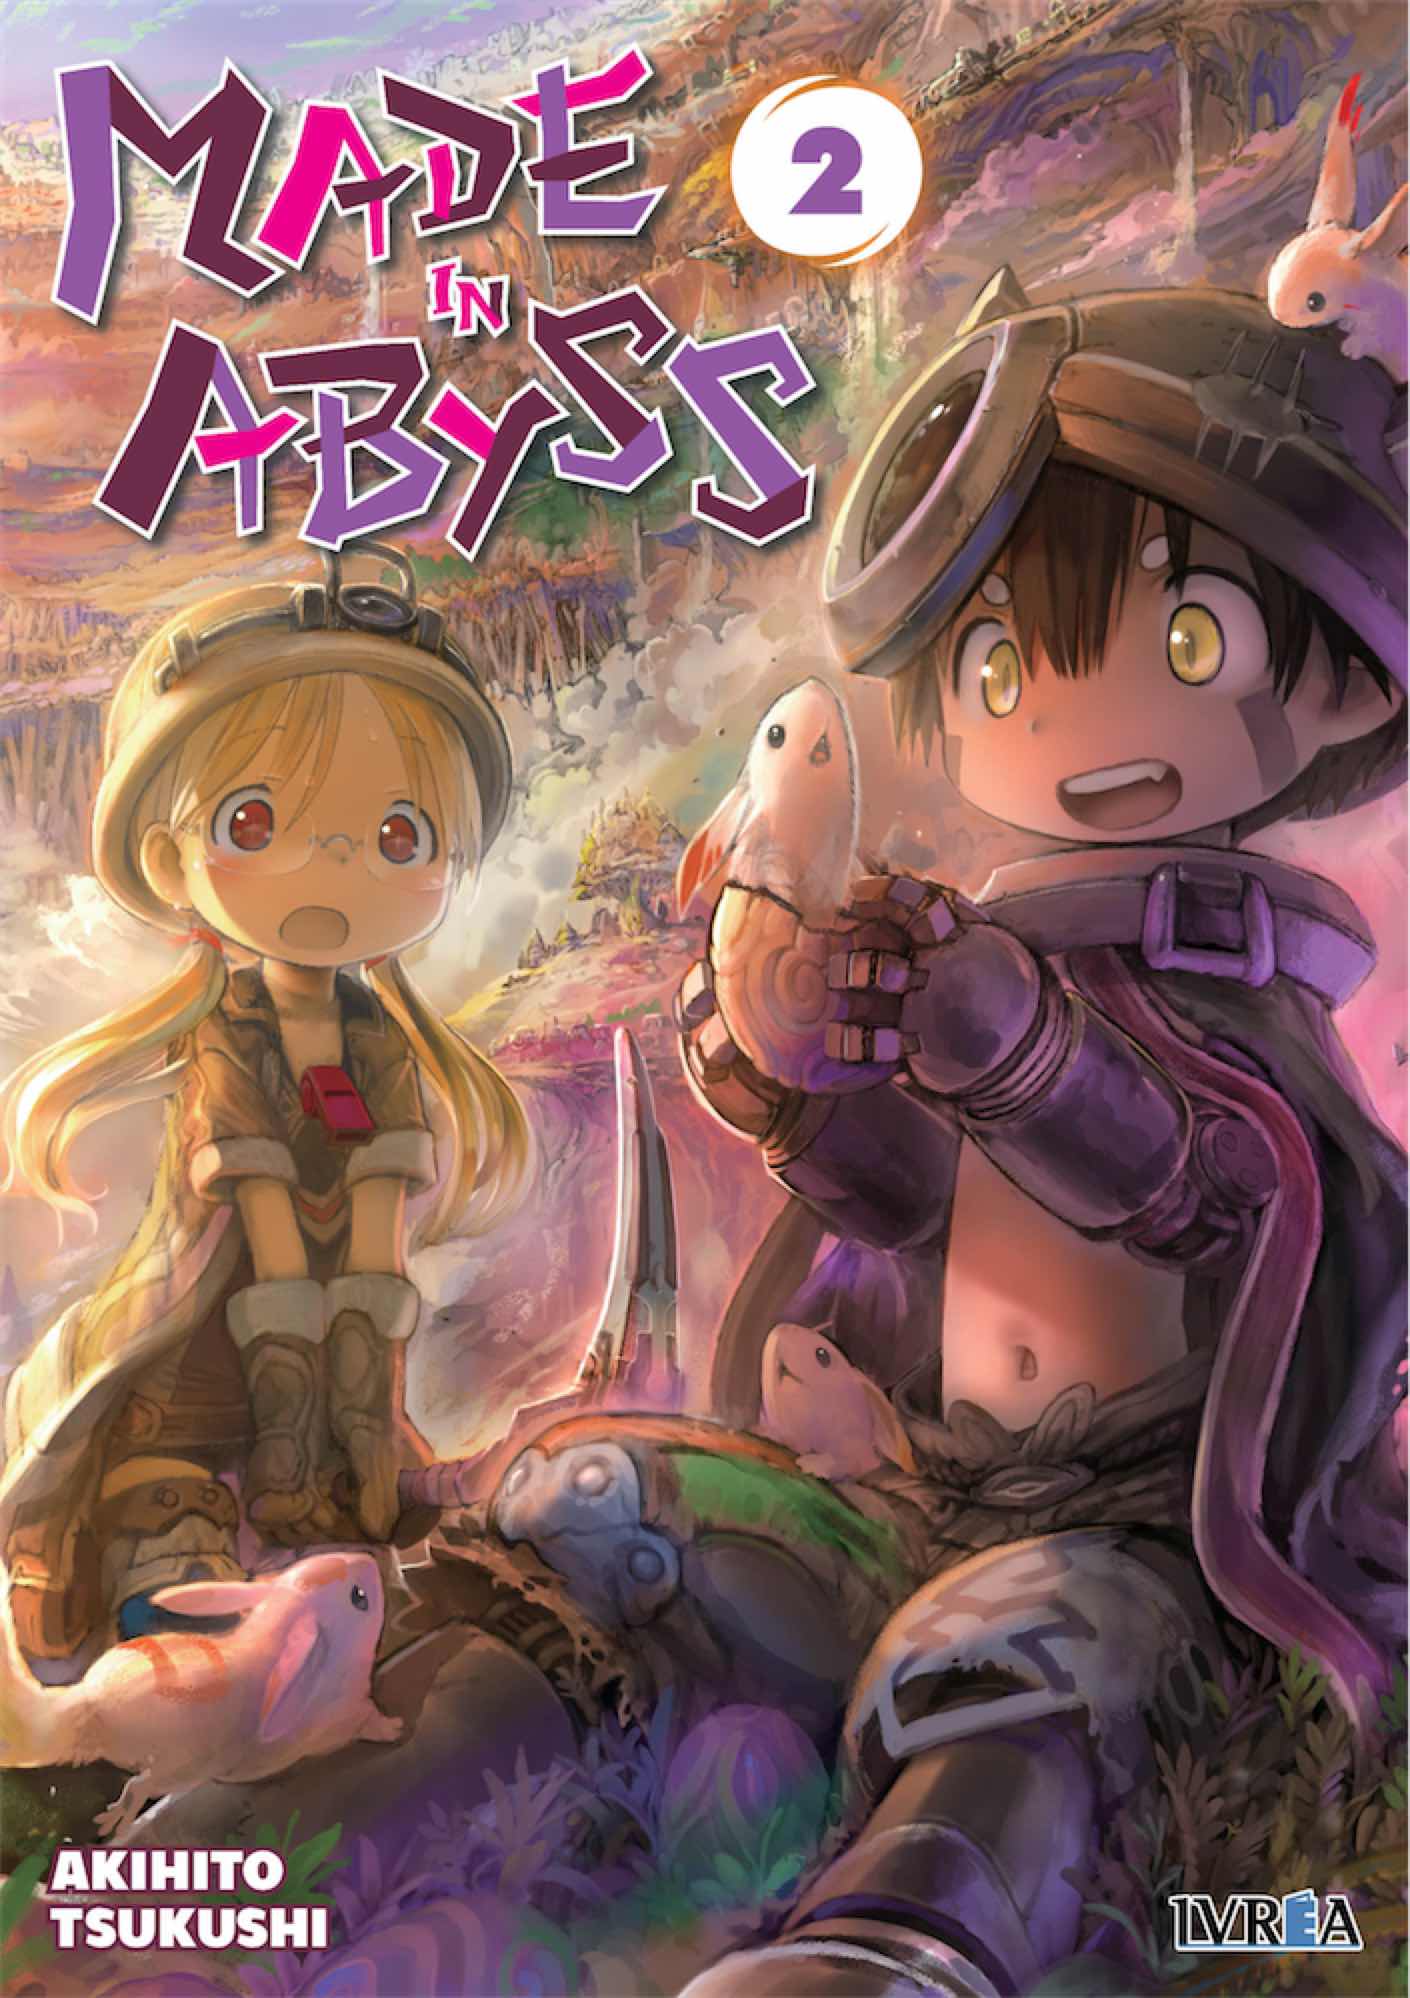 MADE IN ABYSS 02 (COMIC)